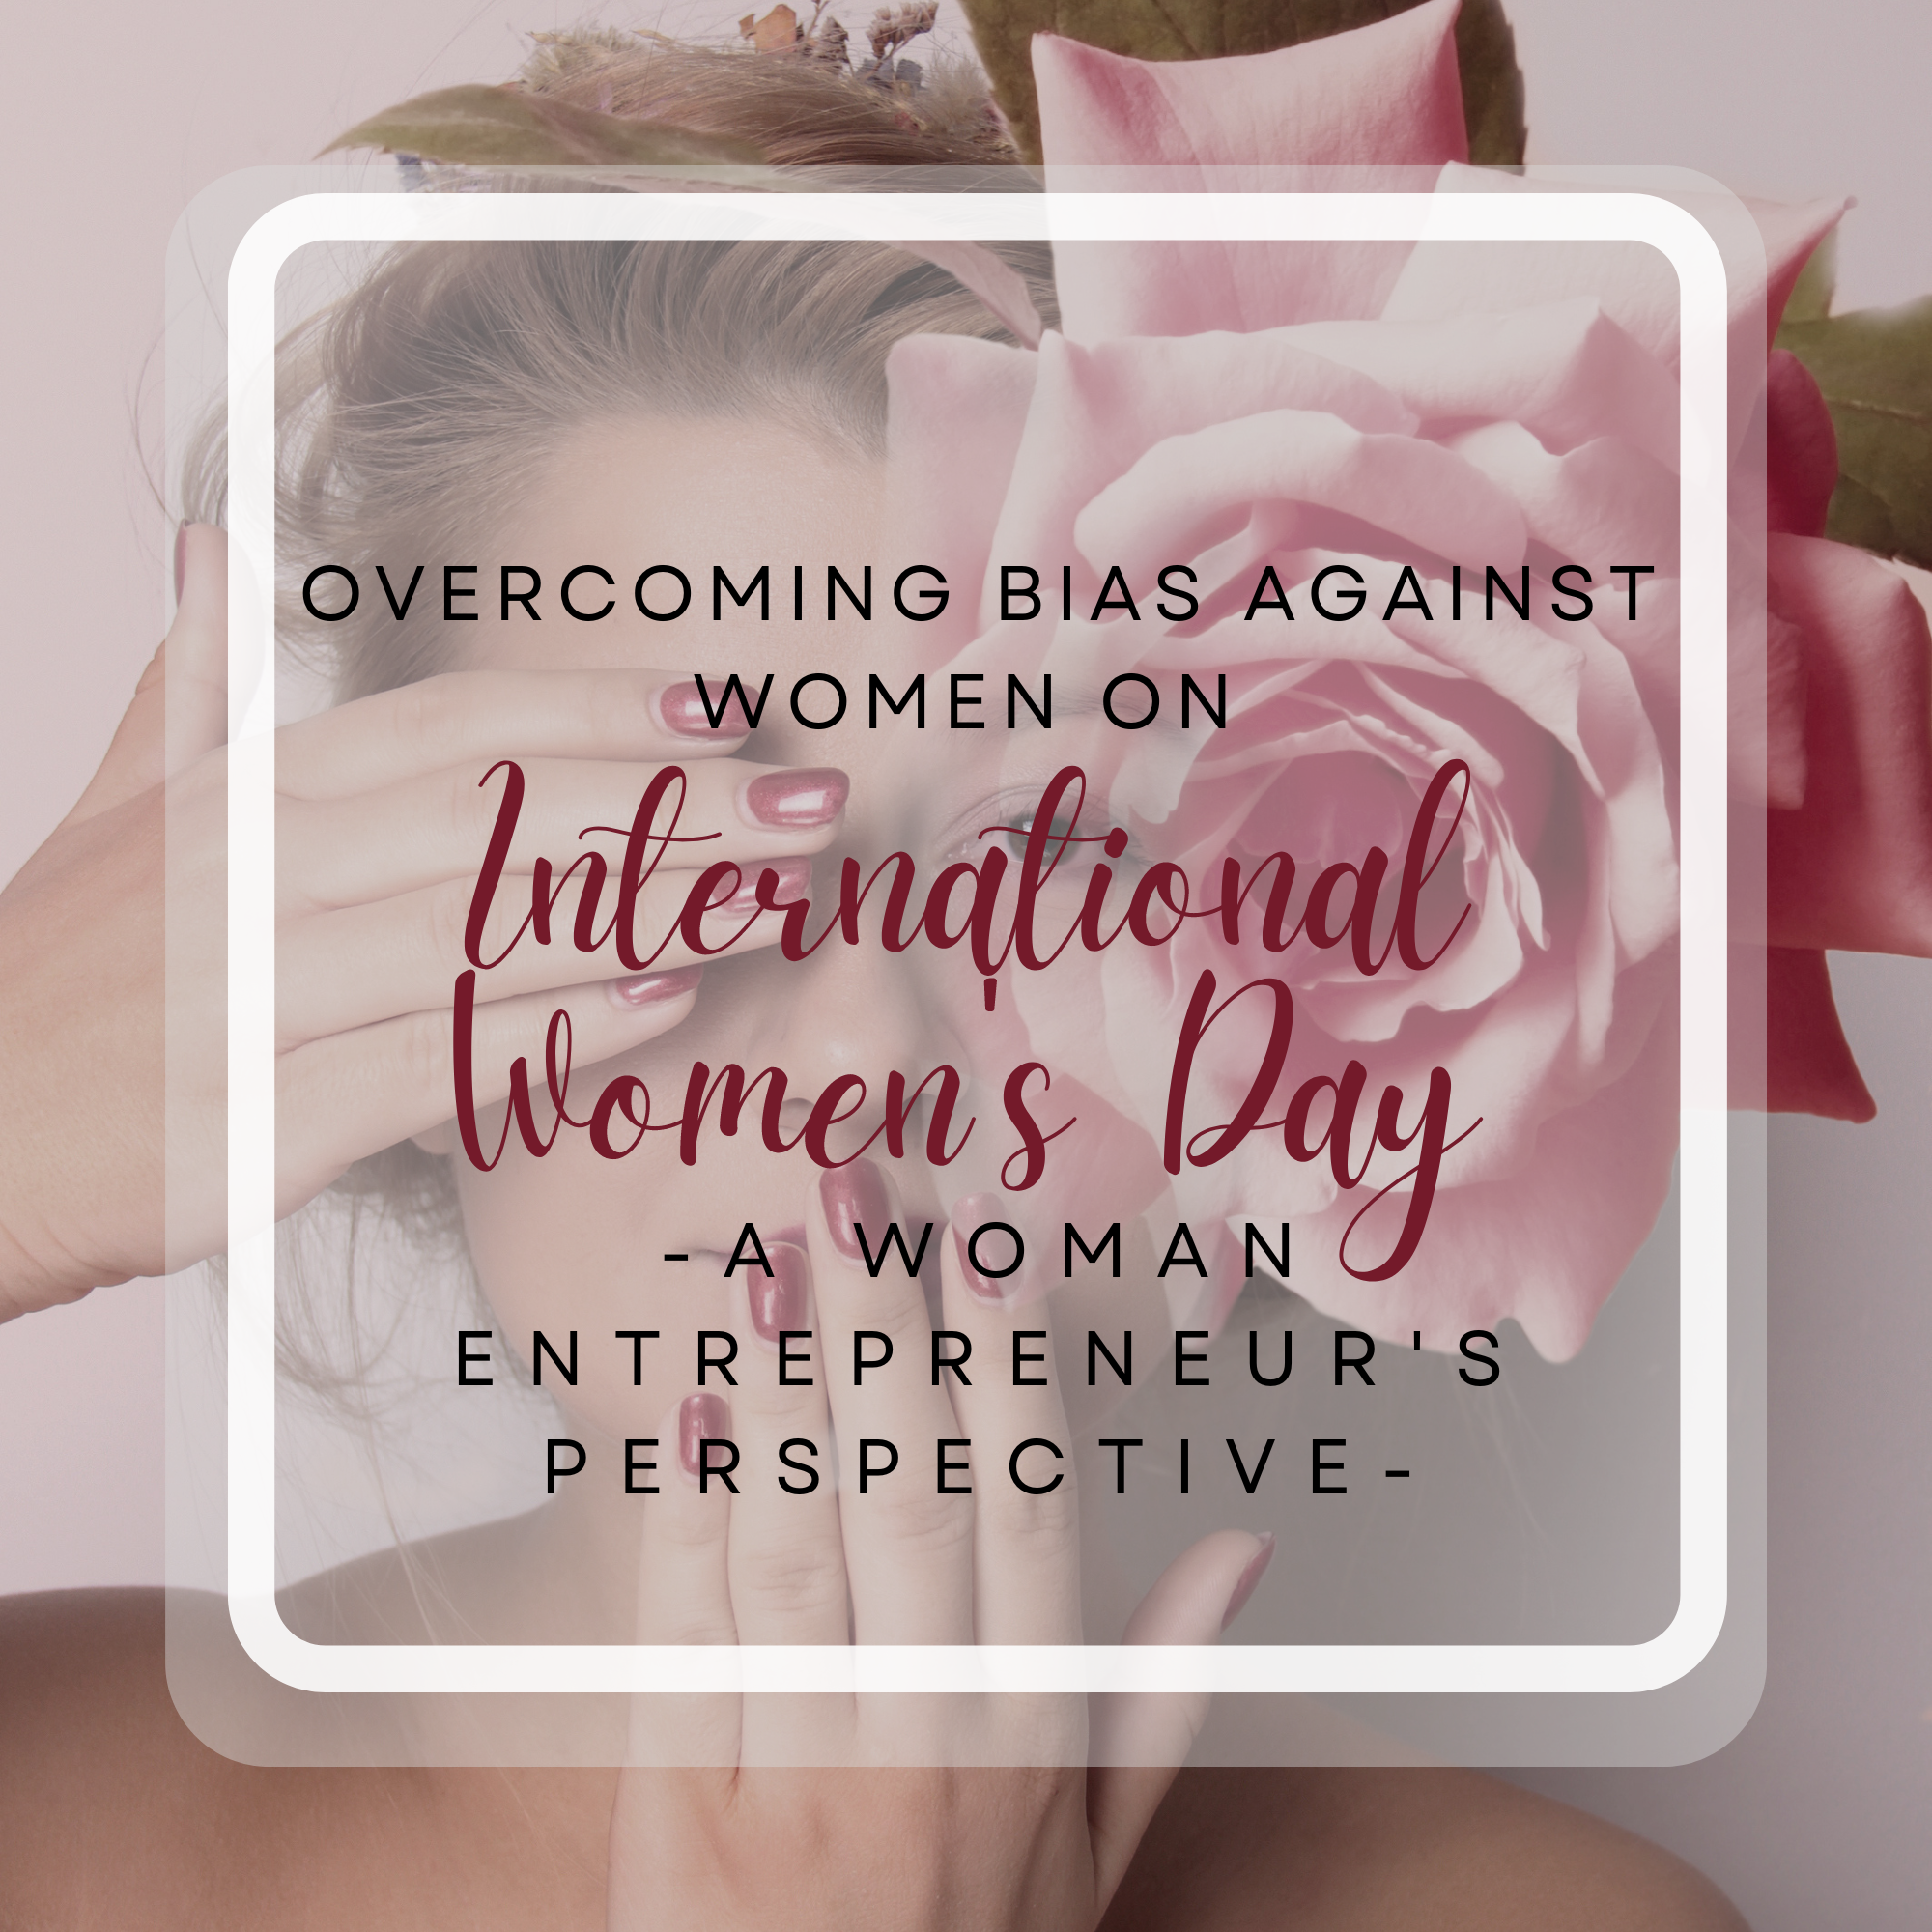 Overcoming Bias Against Women on International Women's Day: A Woman Entrepreneur's Perspective